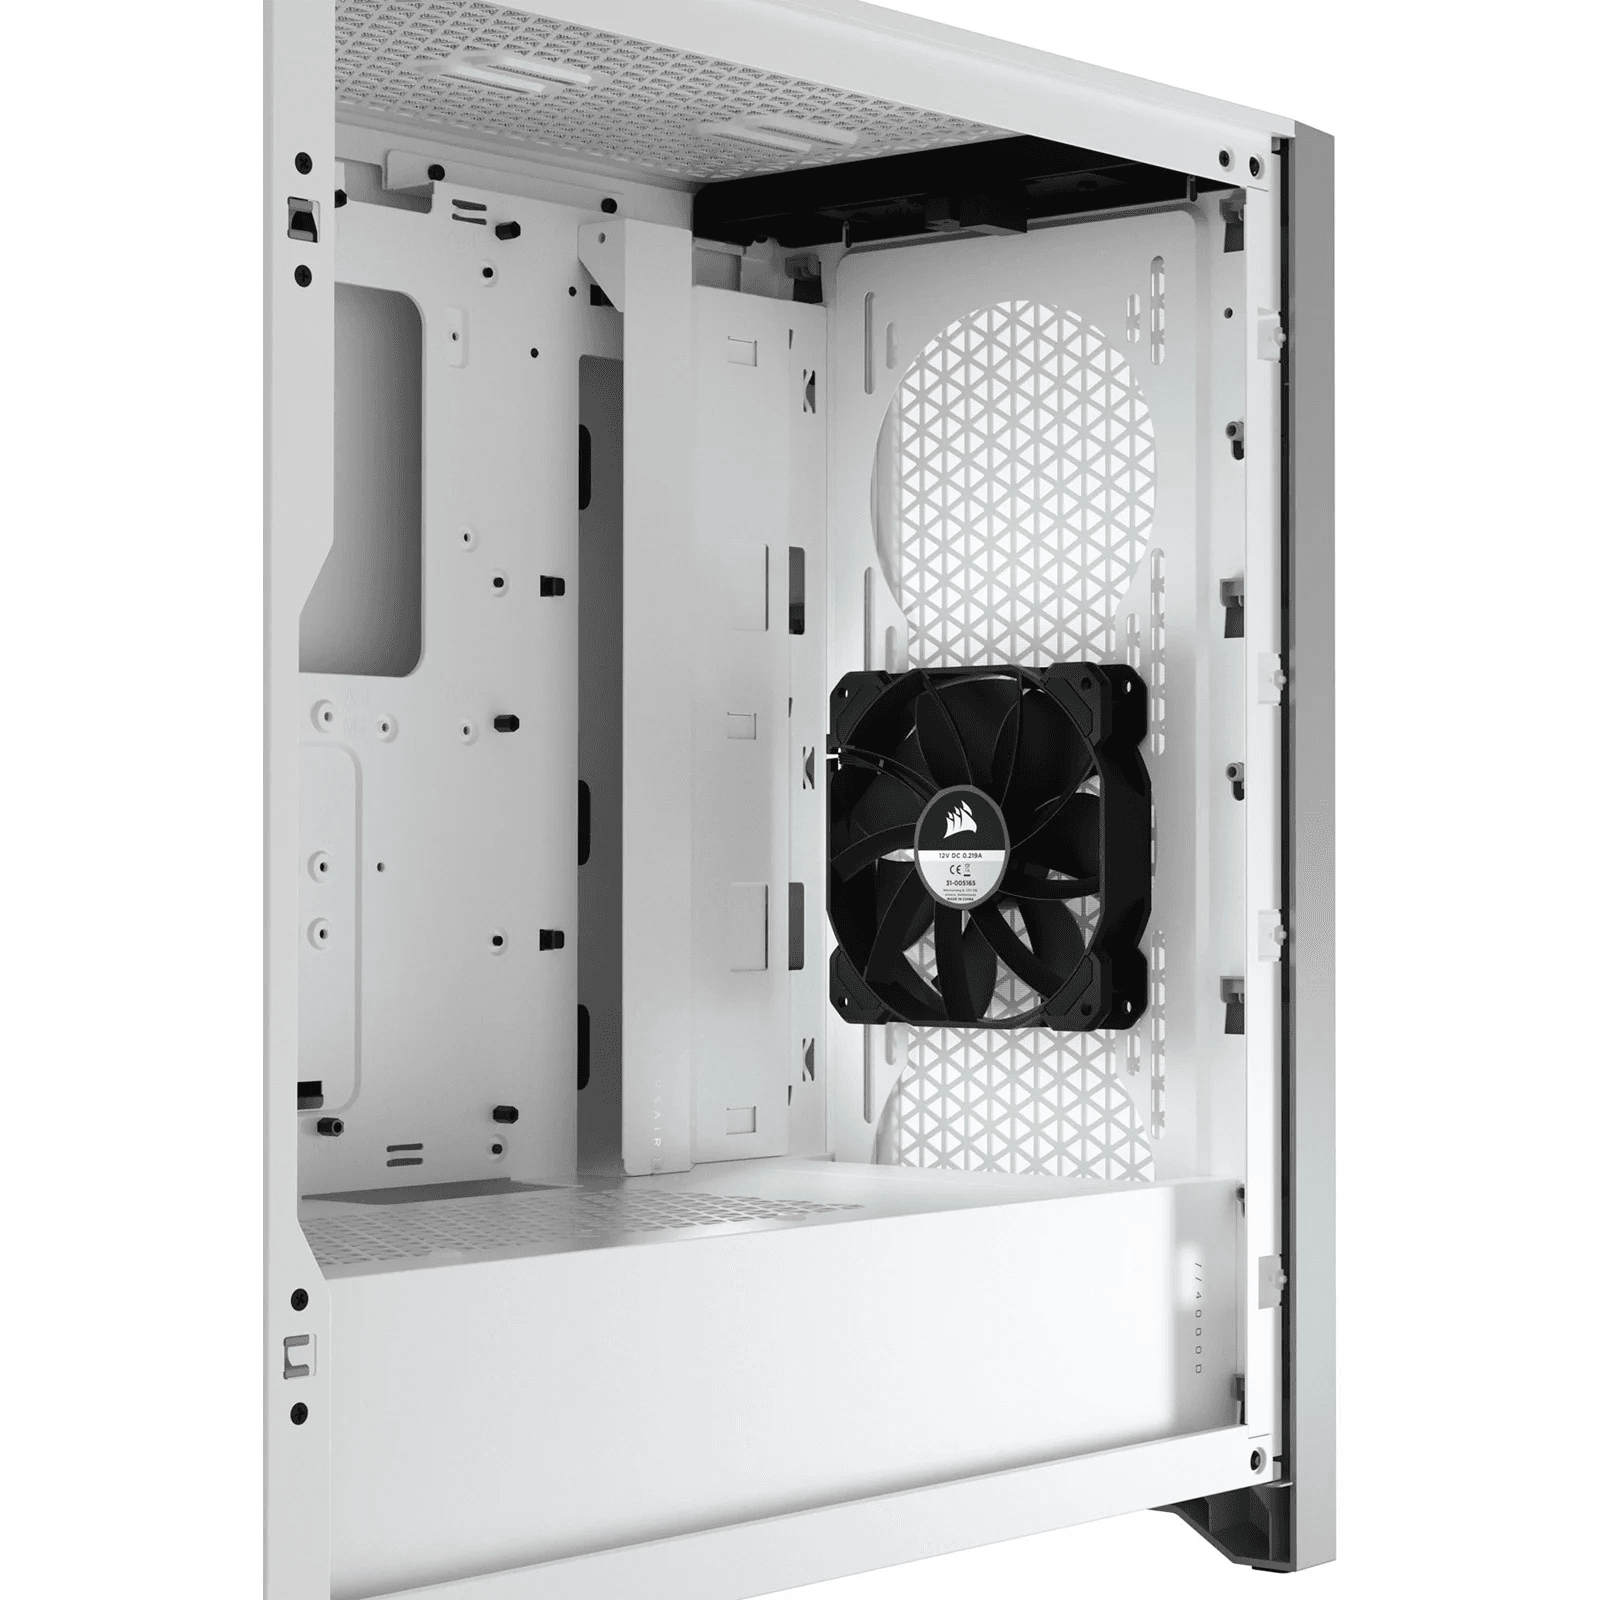 CORSAIR 4000D AIRFLOW TEMPERED GLASS MID-TOWER WHITE